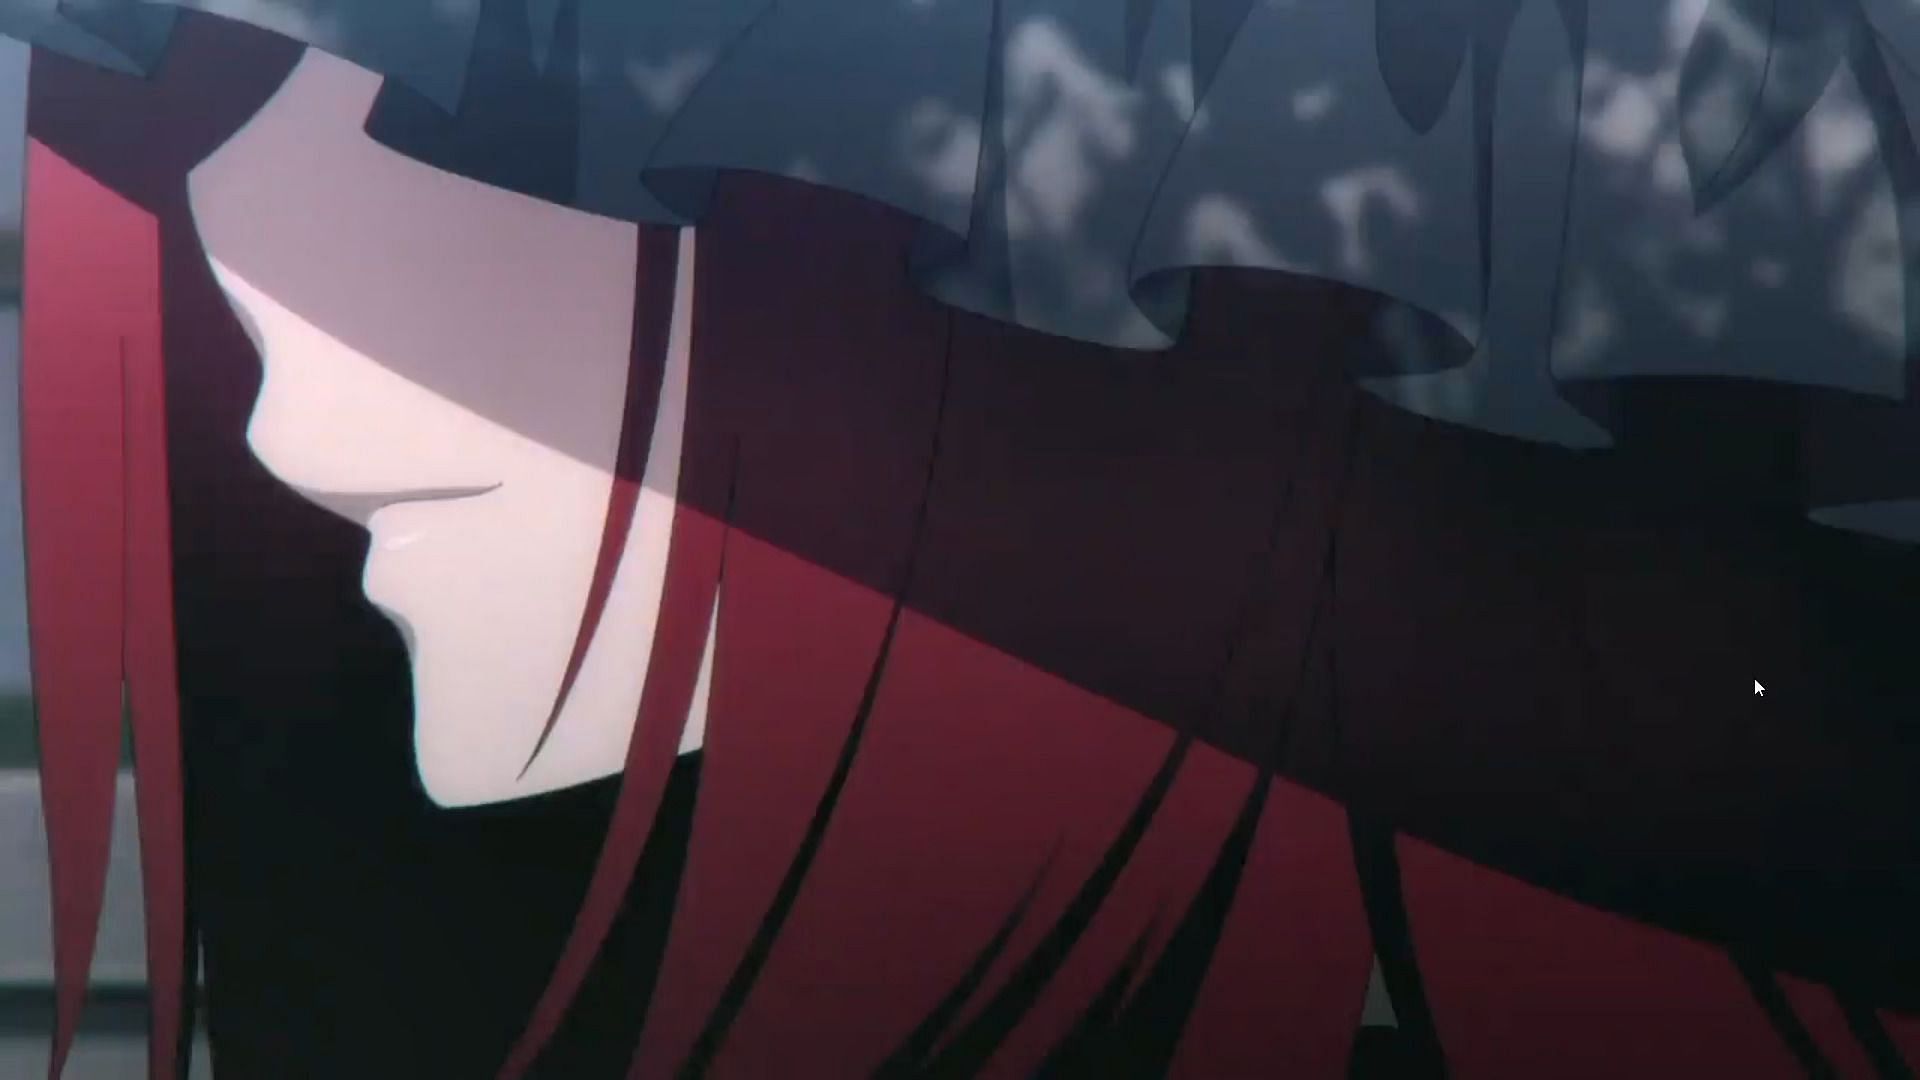 The Eminence in Shadow Anime Reveals Teaser Trailer and Visual